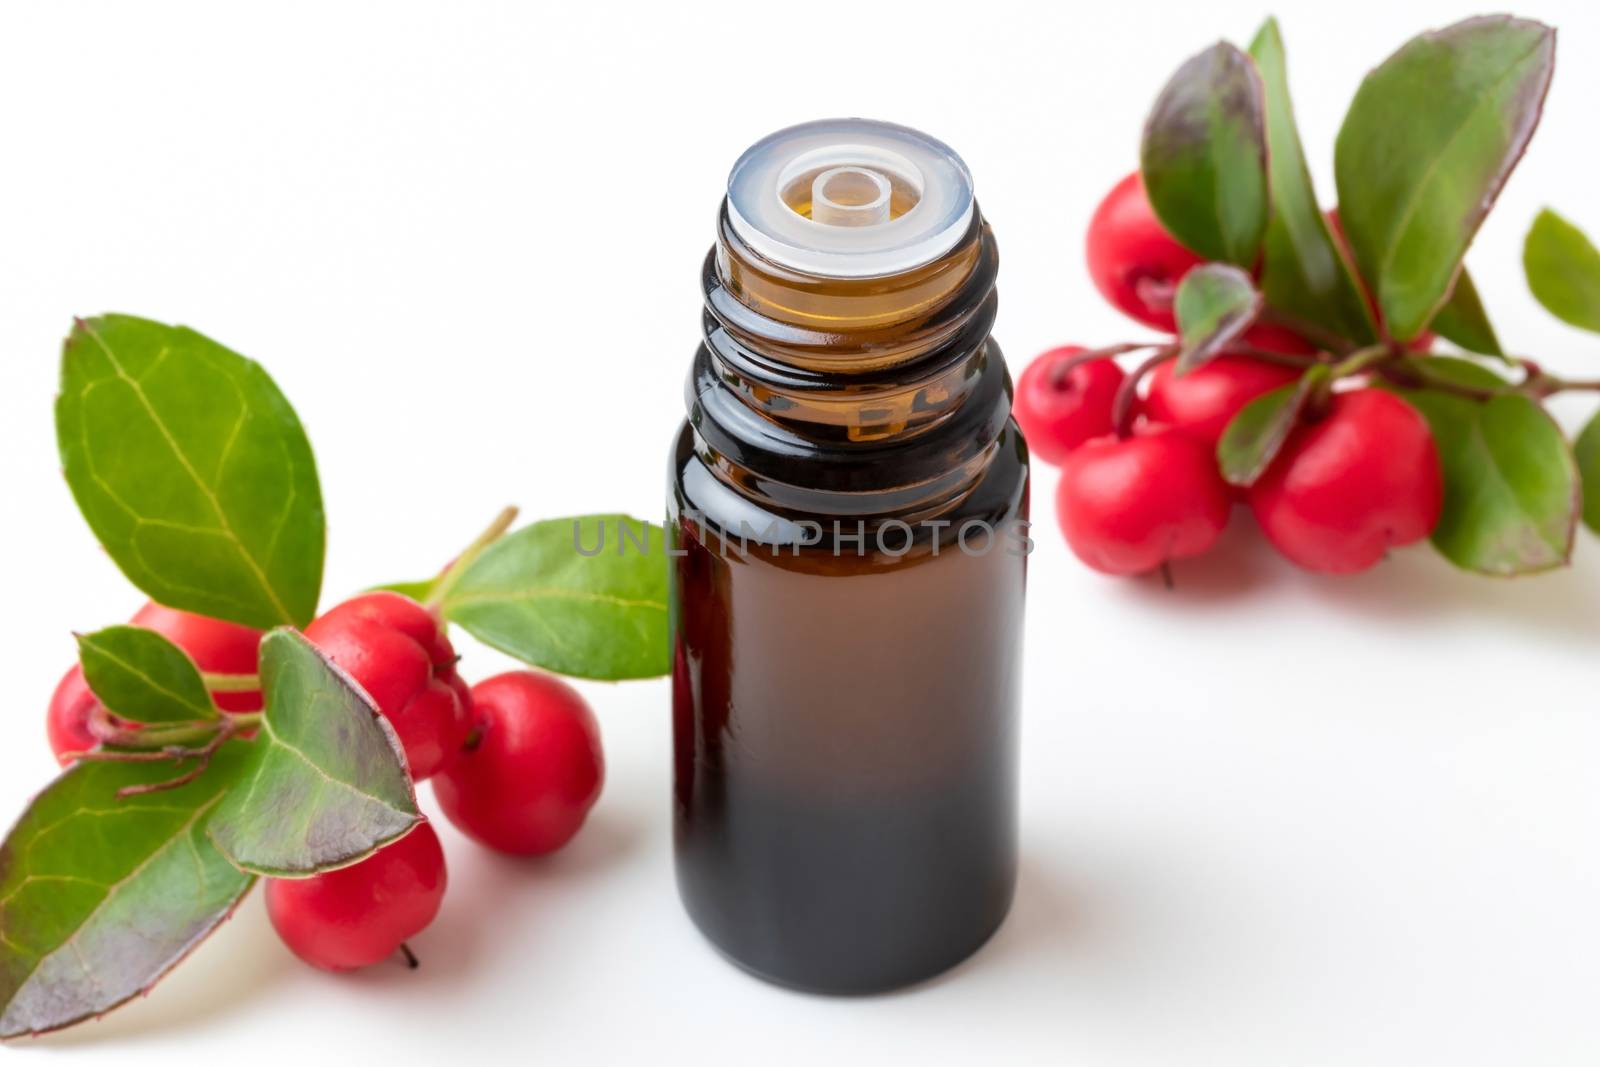 A bottle of essential oil with wintergreen leaves and berries on a white background